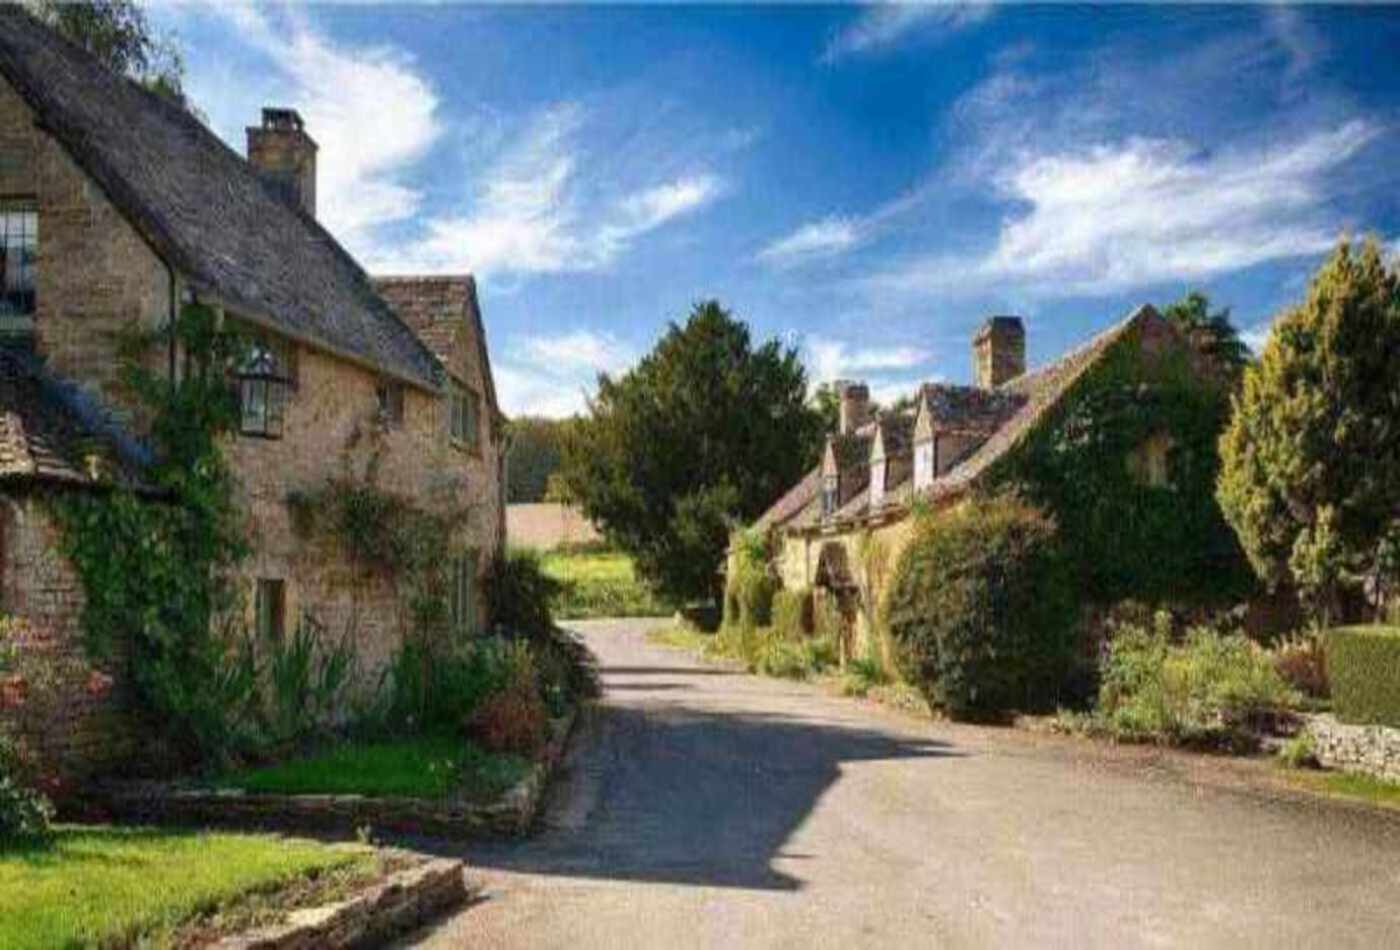 old-cotswold-stone-houses-in-icomb-picture-id178642536 1